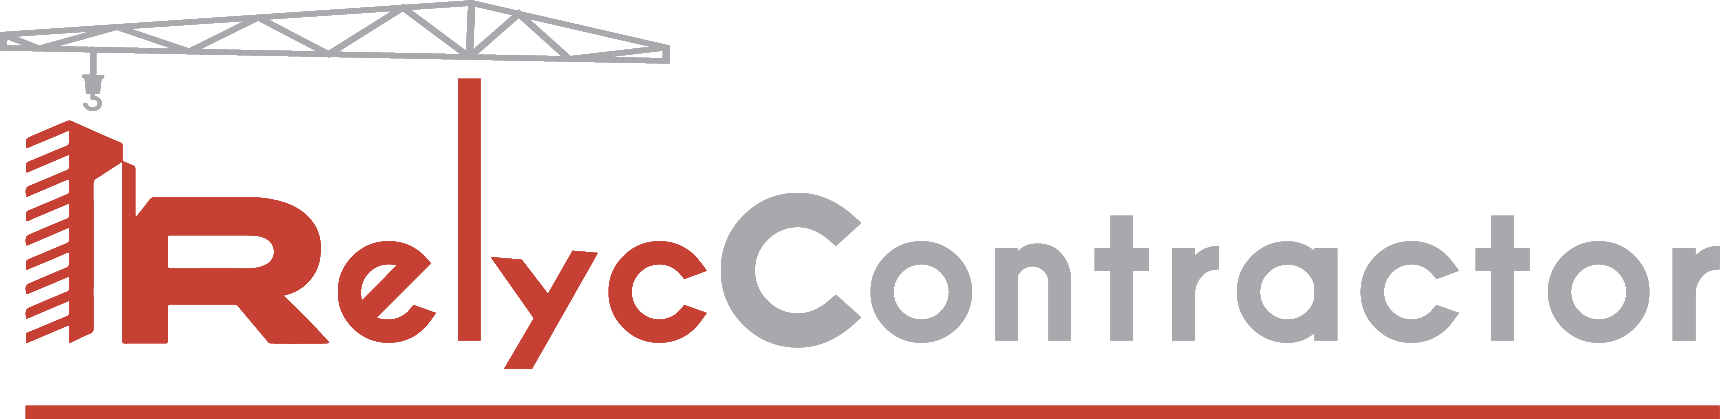 Relyc Contractor